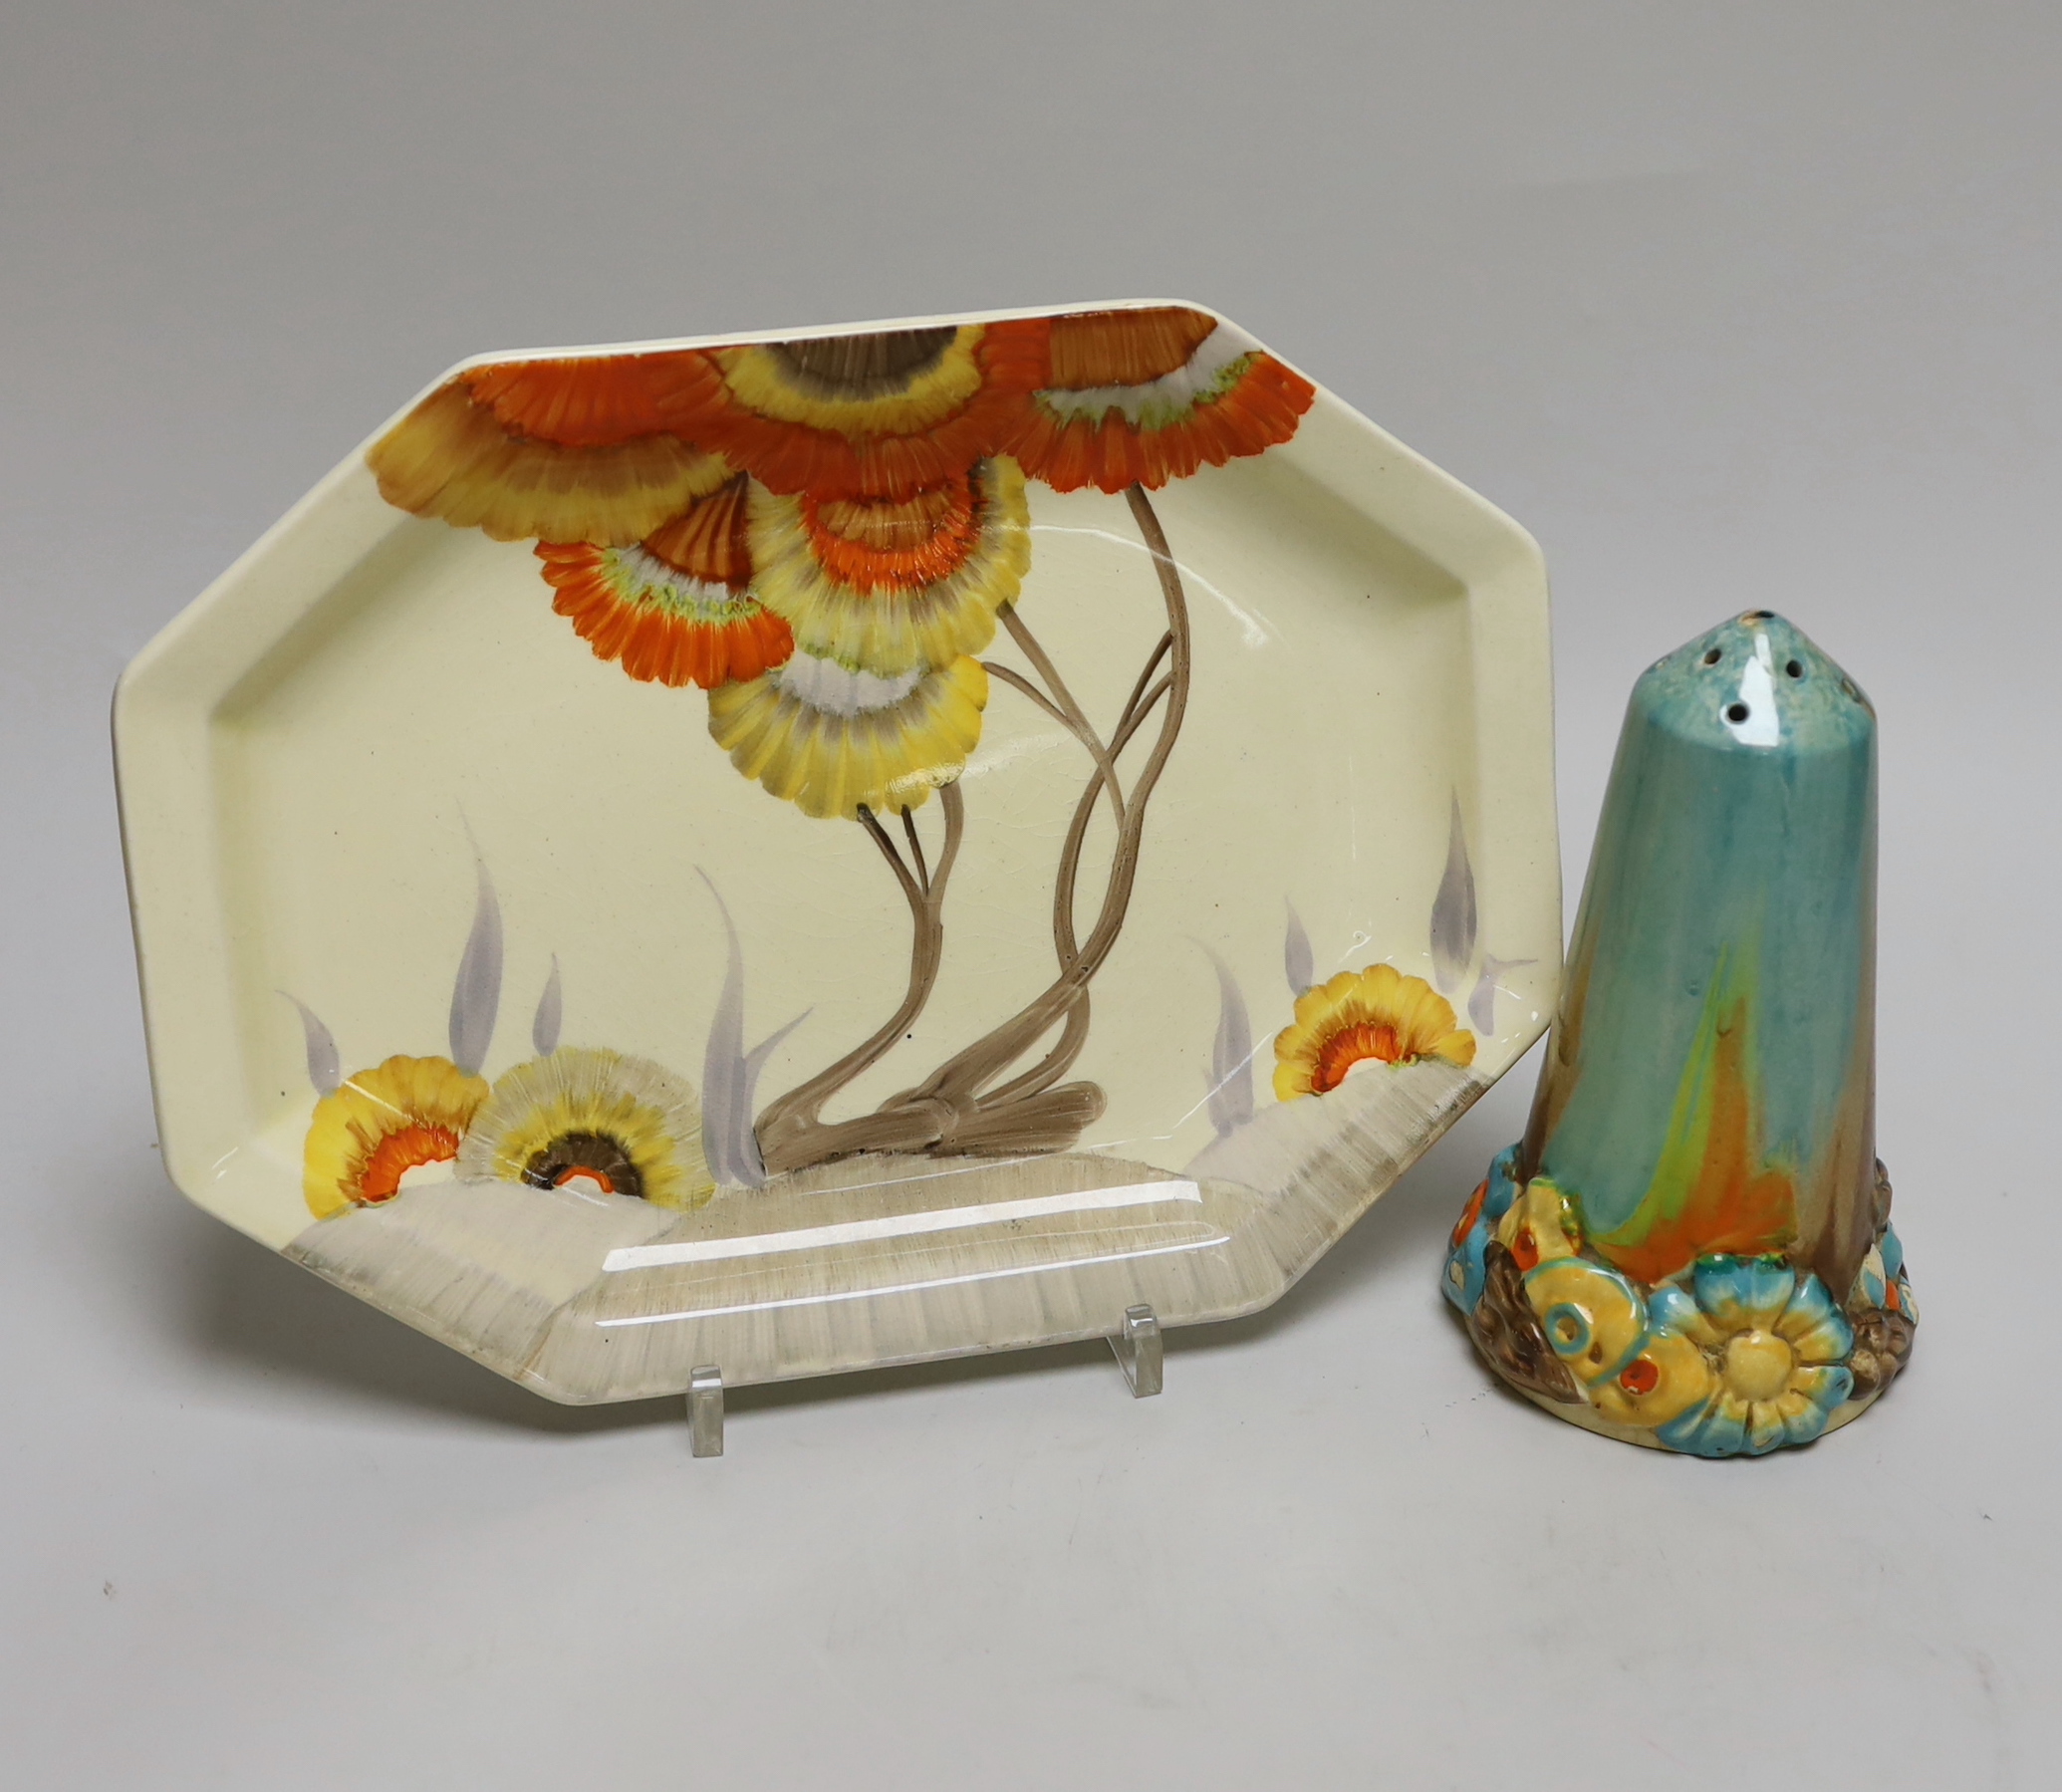 A Clarice Cliff 'My garden' sugar sifter and a Clarice Cliff Rhodanthe dish, 25cm